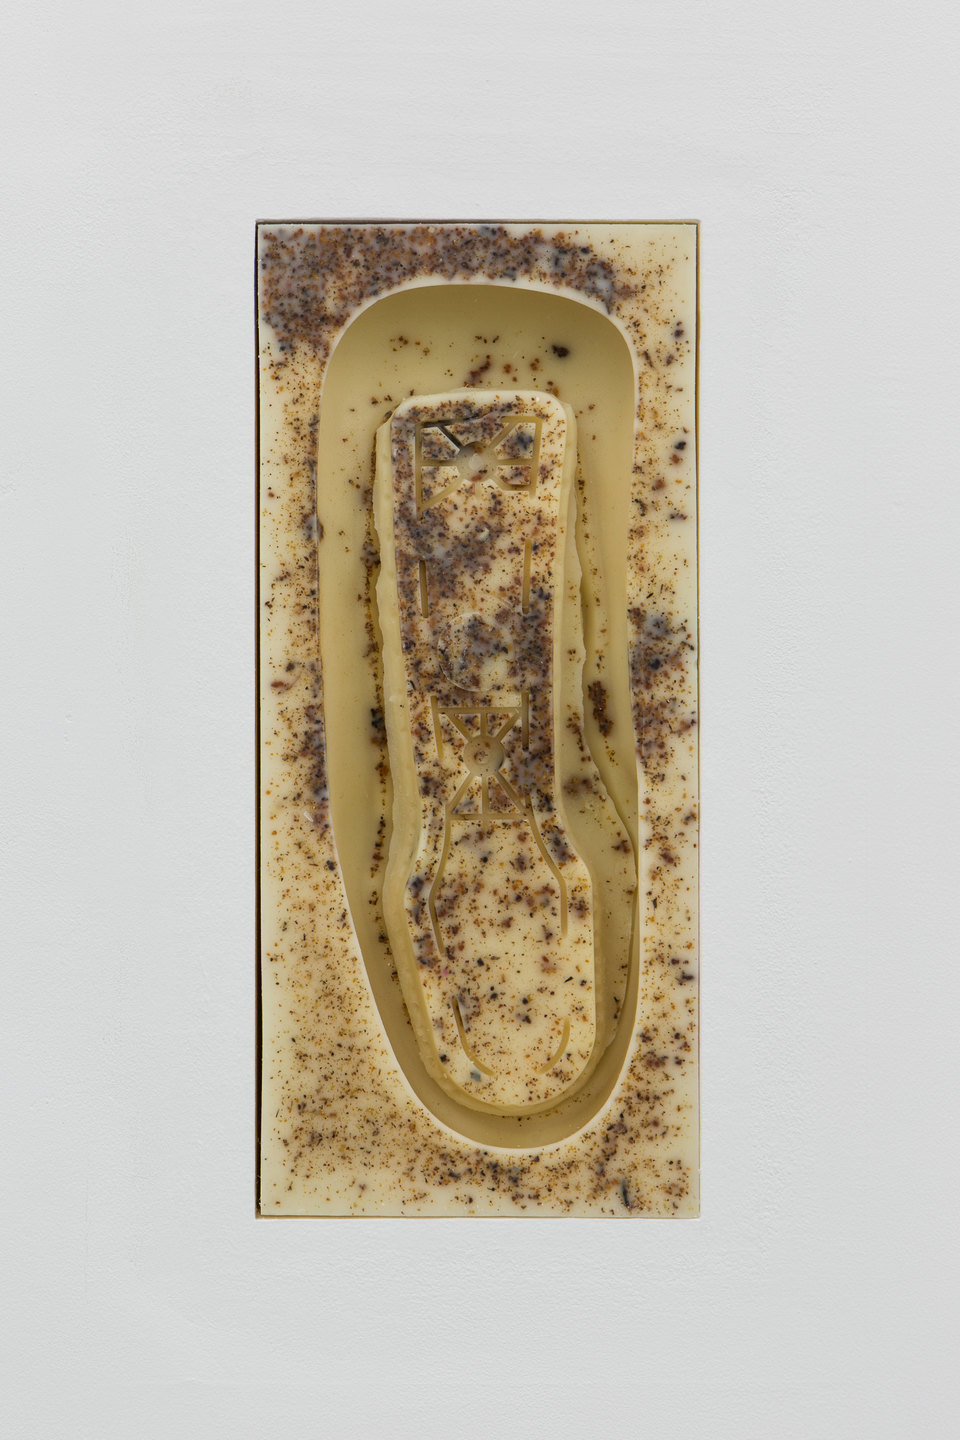 Patricia L. Boyd, 'Aeron Armrest I-XII', 2019, (Detail) Used restaurant grease, wax, damar resin 31.1 x 13.7cm each, Cell Project Space